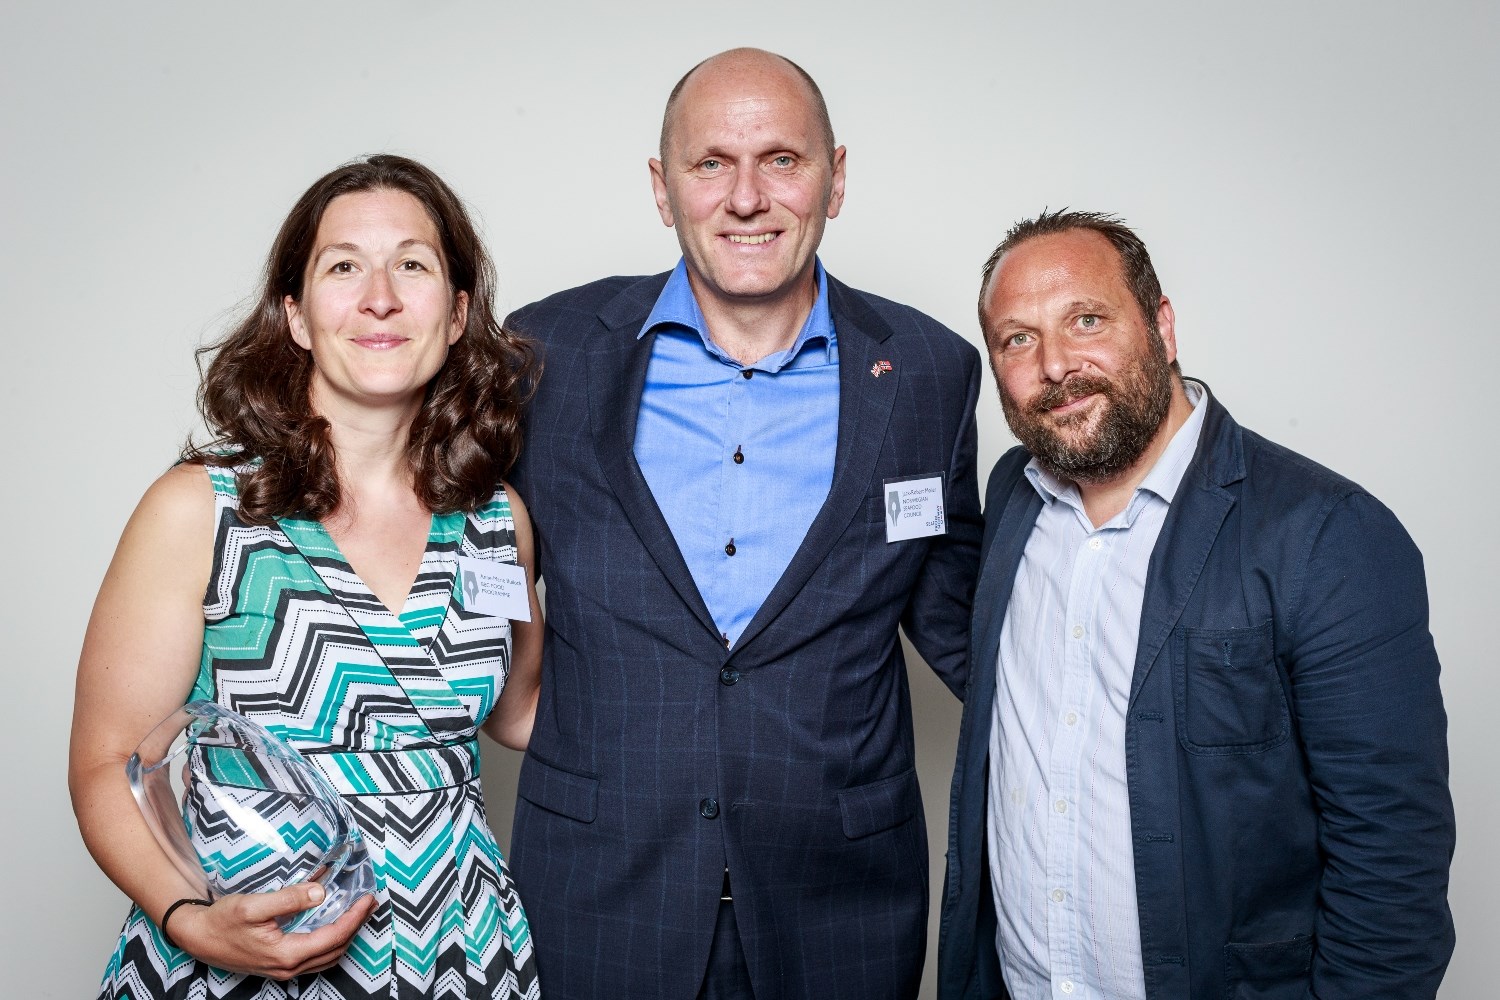 From left to right; Anne-Marie Bullock, Jack-Robert Møller, the UK Director for the Norwegian Seafood Council, and Dan Saladino